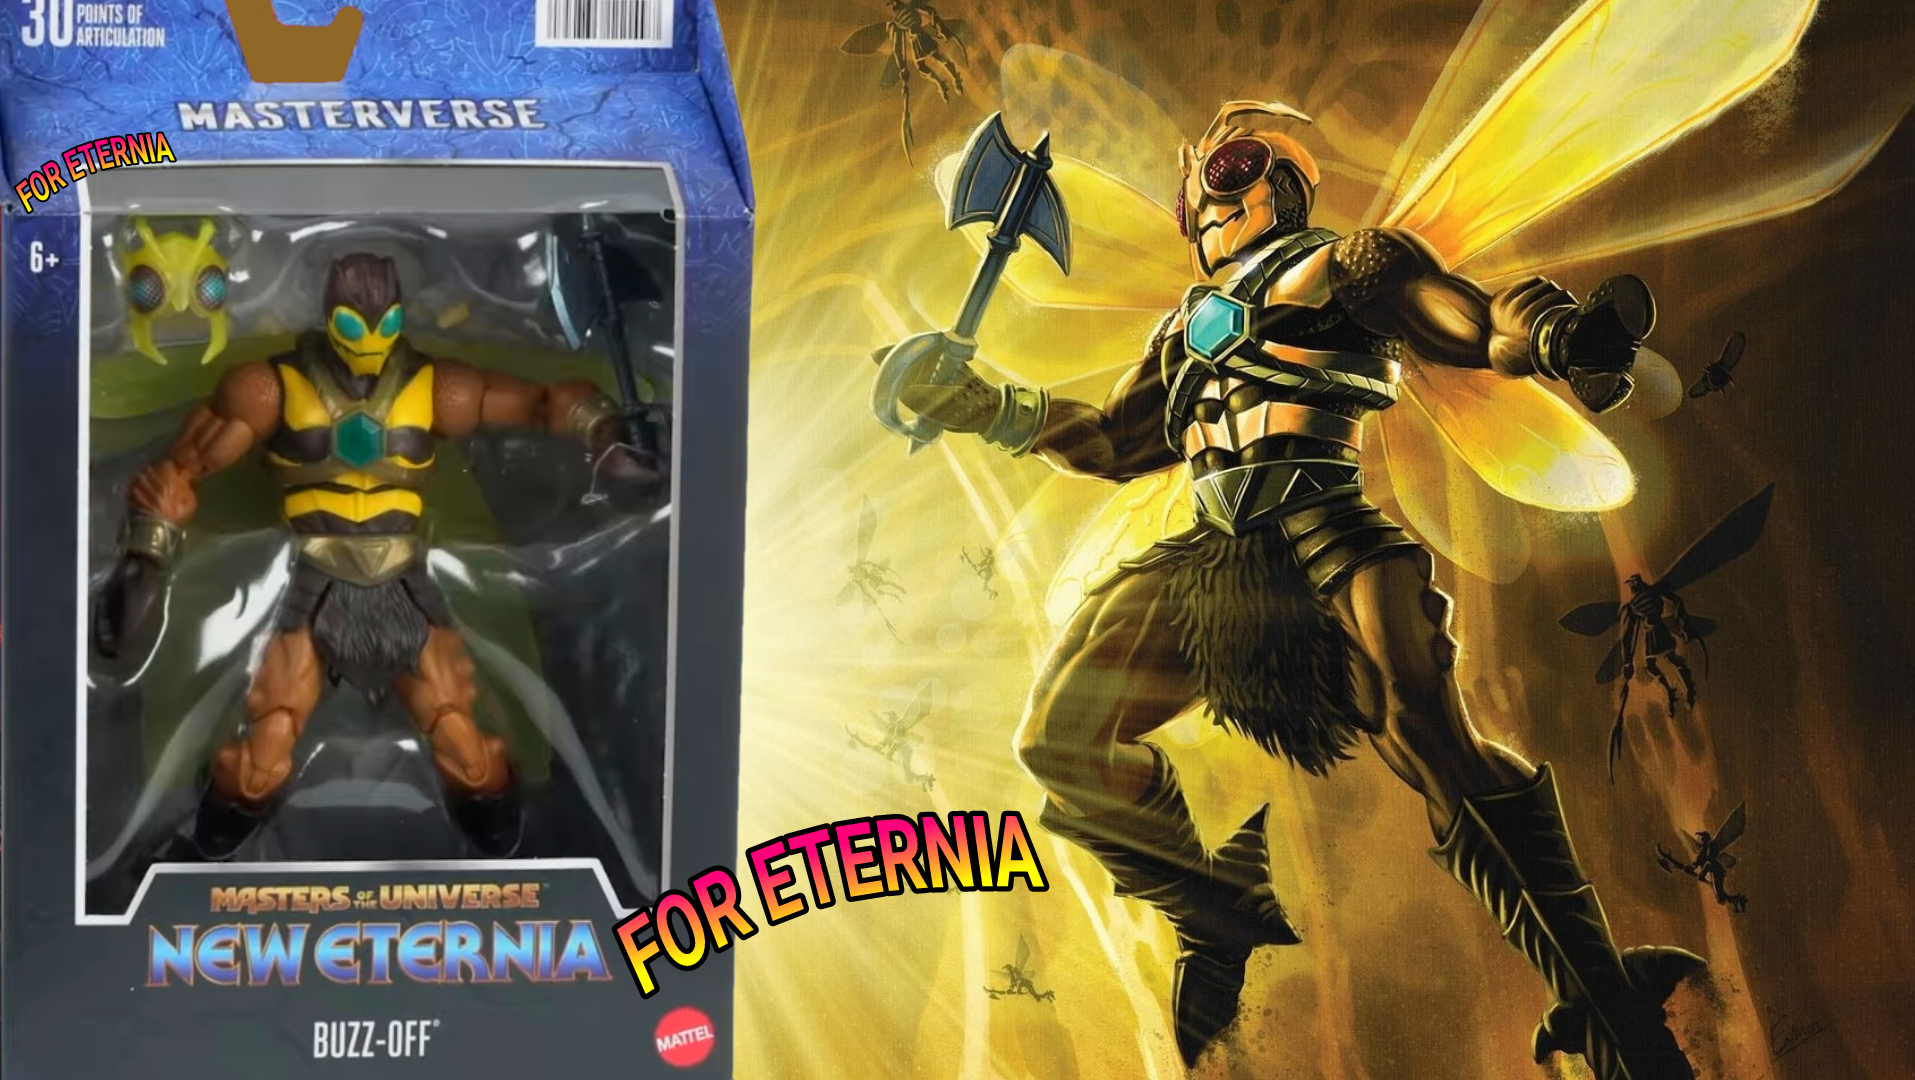 Masterverse New Eternia Buzz-Off Wave 9 packaging artwork and bio revealed